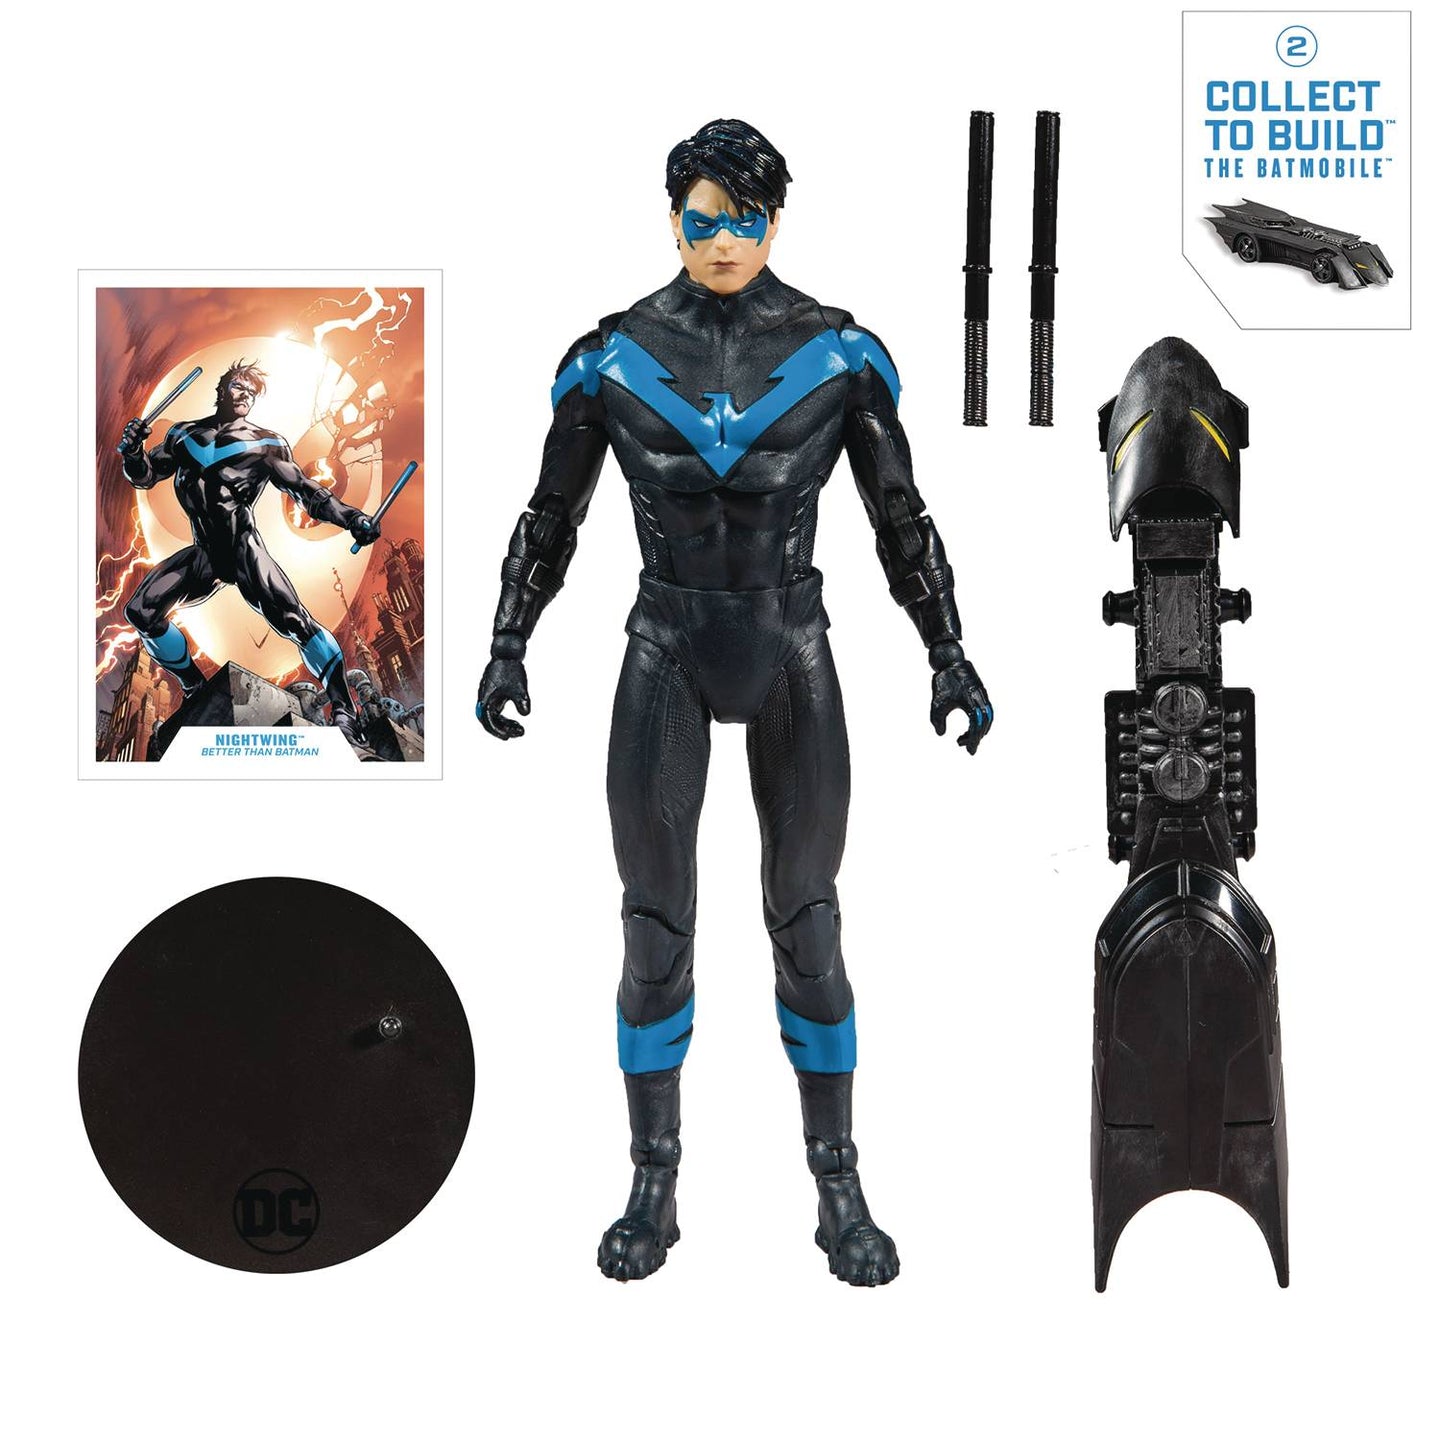 DC Multiverse Nightwing 7 Inch Scale Action Figure with Part #2 Build-A Rebirth-Batmobile